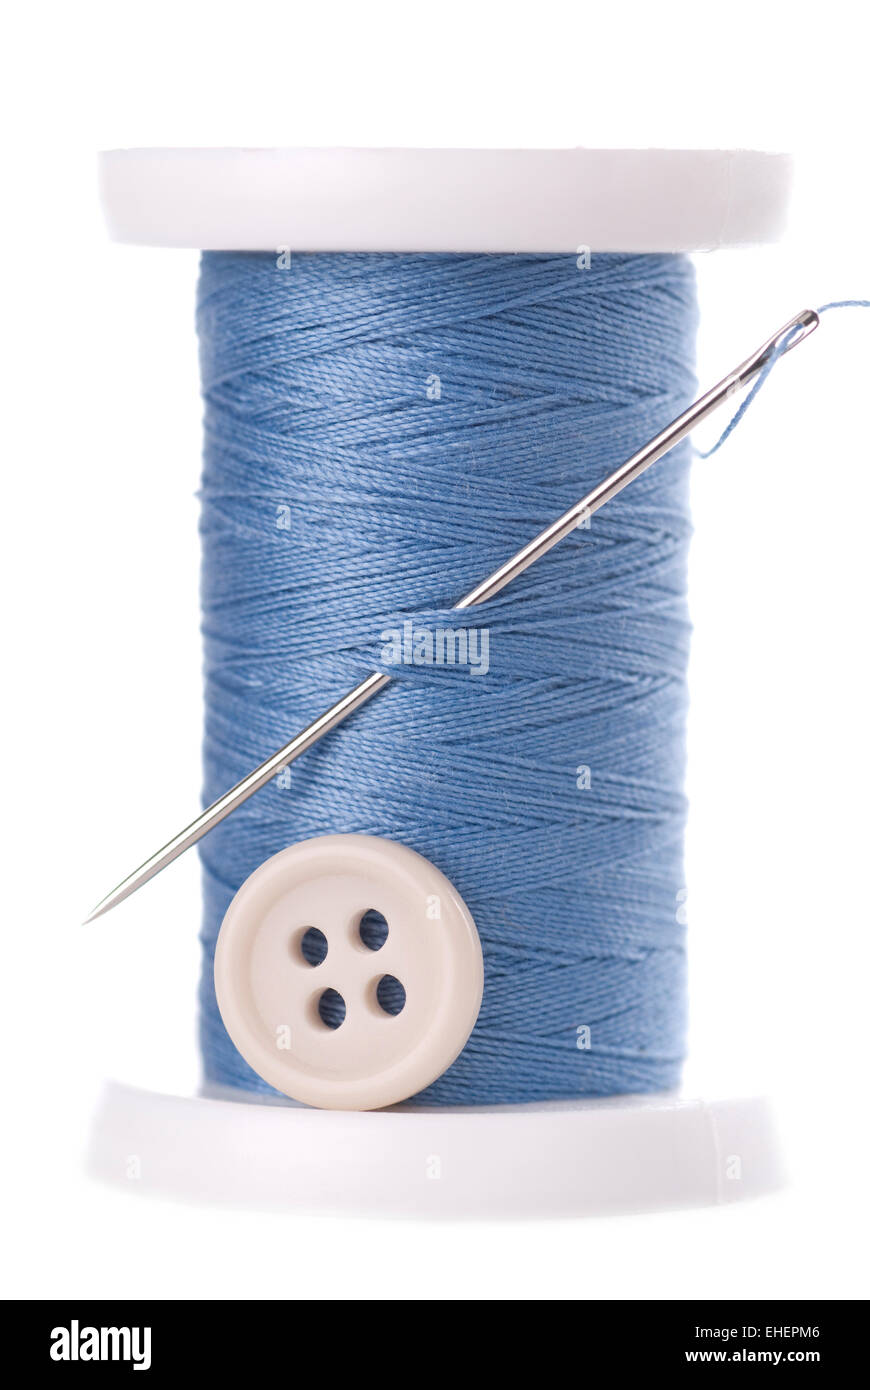 A spool of blue thread with needle and a white button. Stock Photo